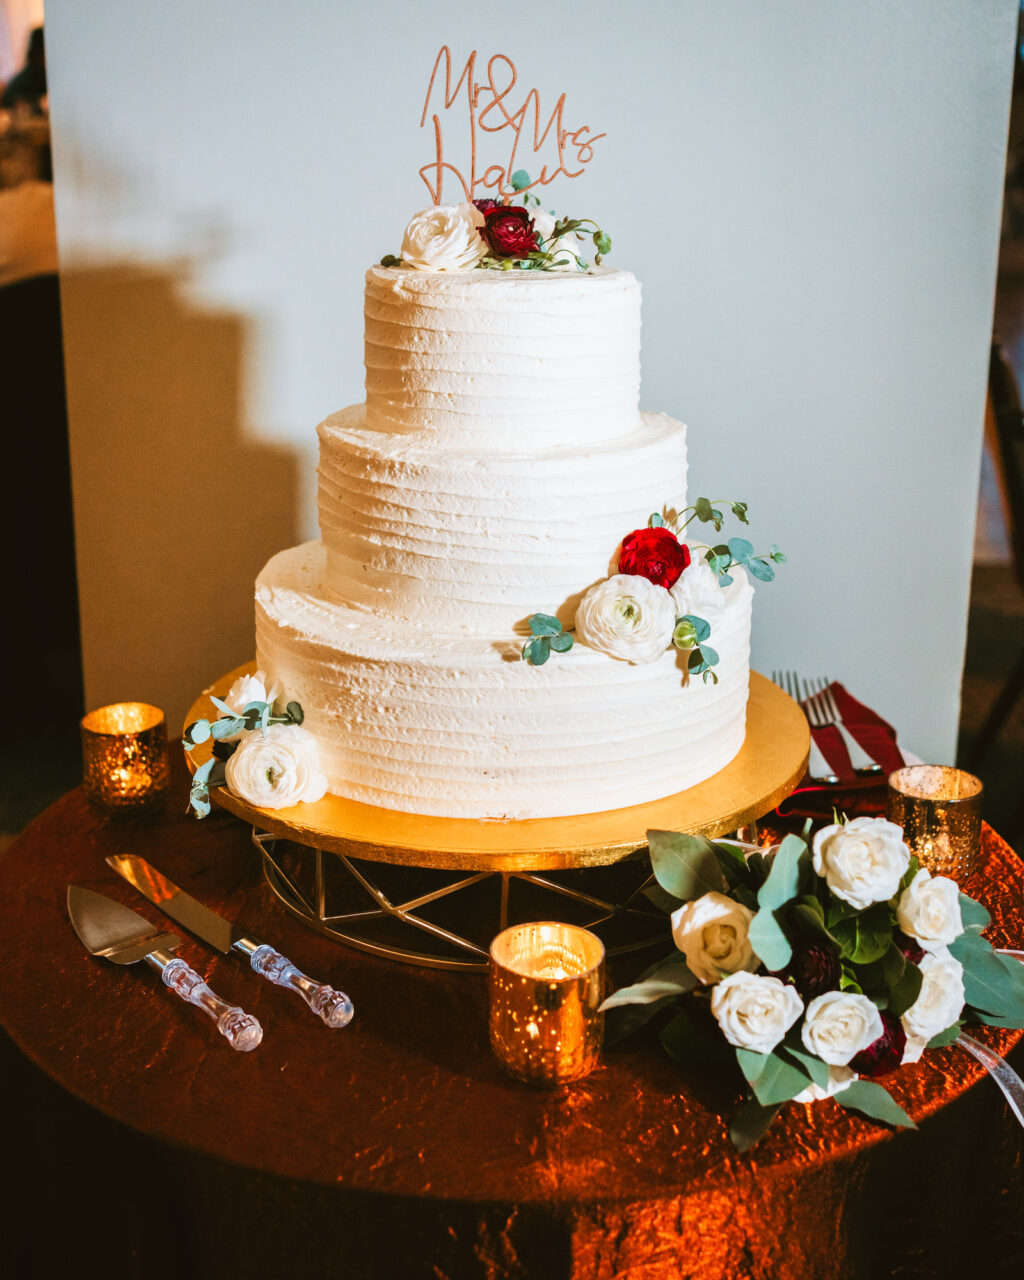 Three tier white textured wedding cake with white and red roses cake topper and gold wire personalized topper | Tampa wedding photographer Bonnie Newman Creative | Wedding planner Coastal Coordinating | Wedding florist Iza’s Flowers